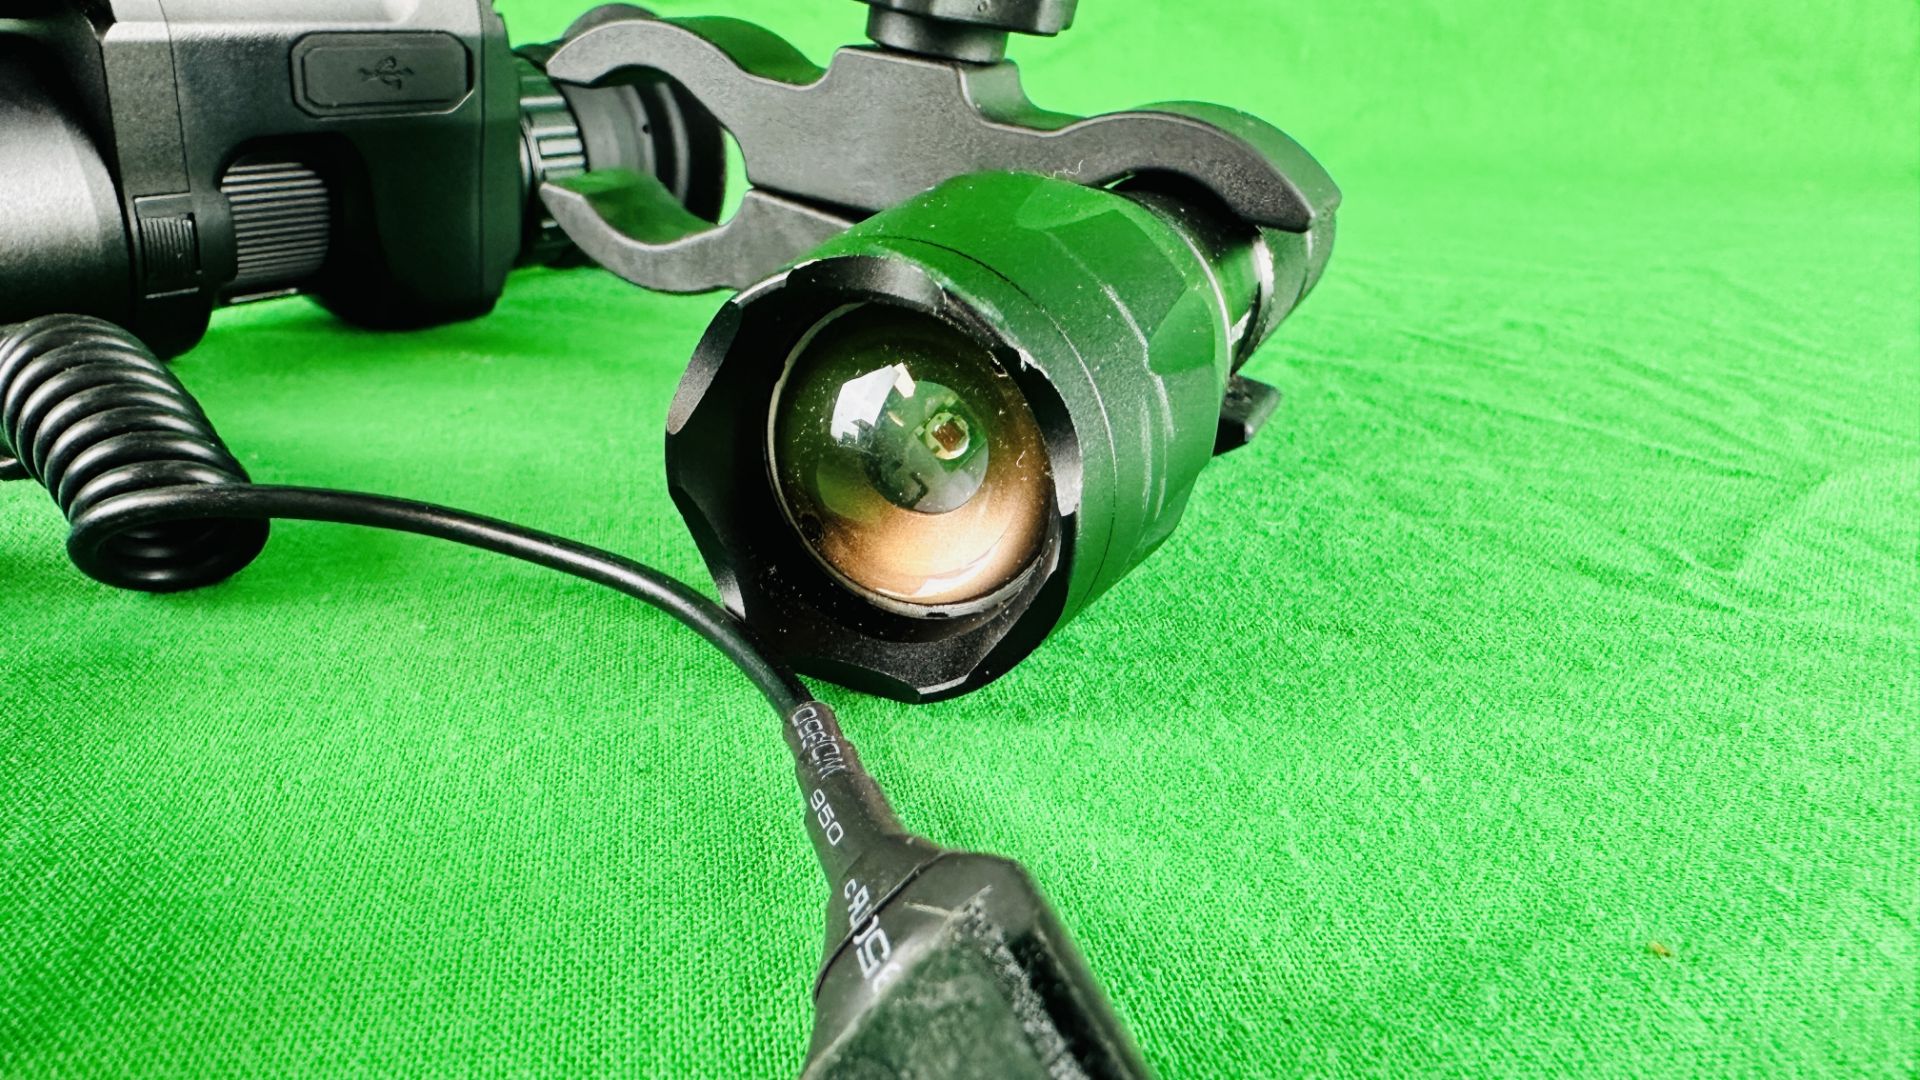 PARD DIGITAL NIGHT VISION SCOPE MODEL NV007V COMPLETE WITH CHARGER PLUS WESLITE RED LIGHT TORCH. - Image 7 of 13